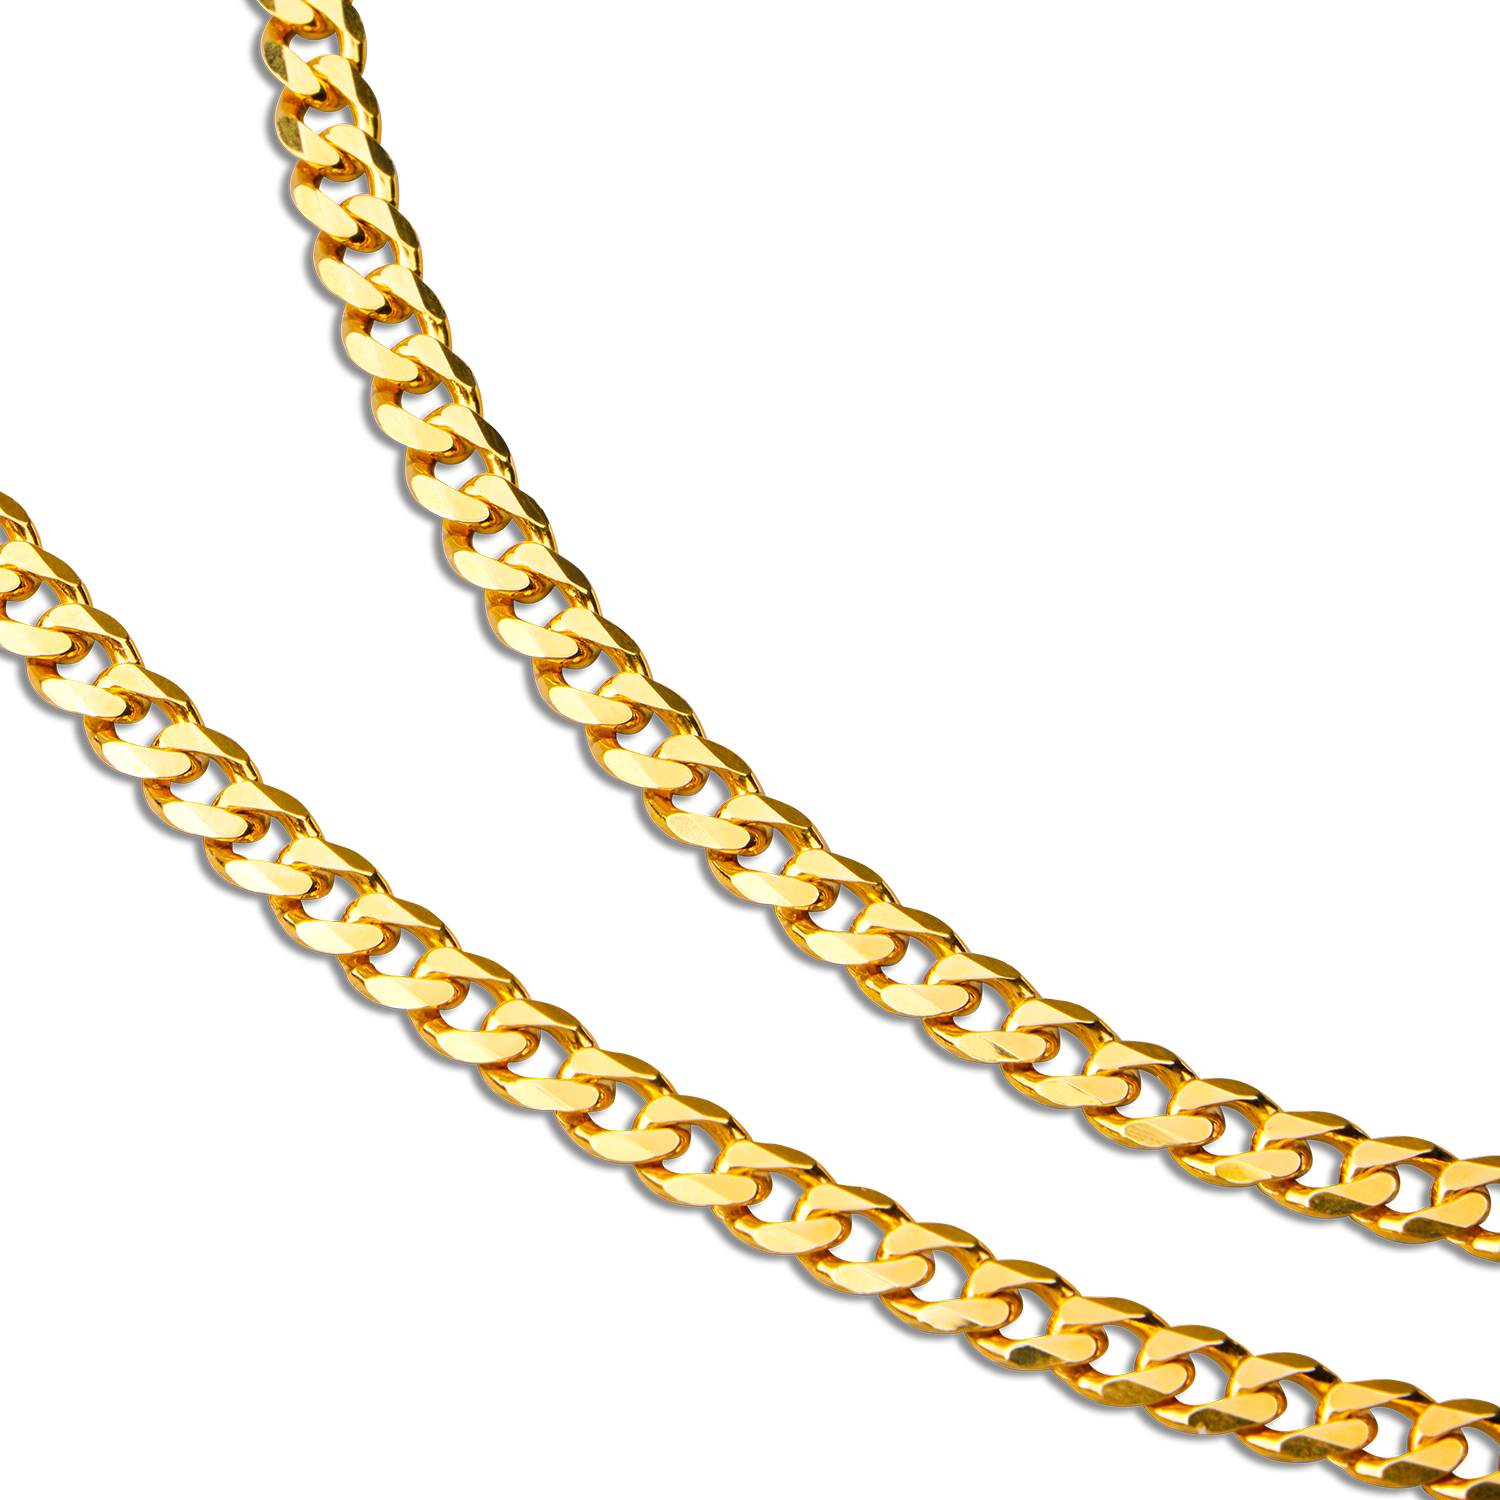 18K GP Stainless Steel 5mm Cuban Link Chain -   Mens chain necklace,  Cuban link chain, Mens beaded necklaces